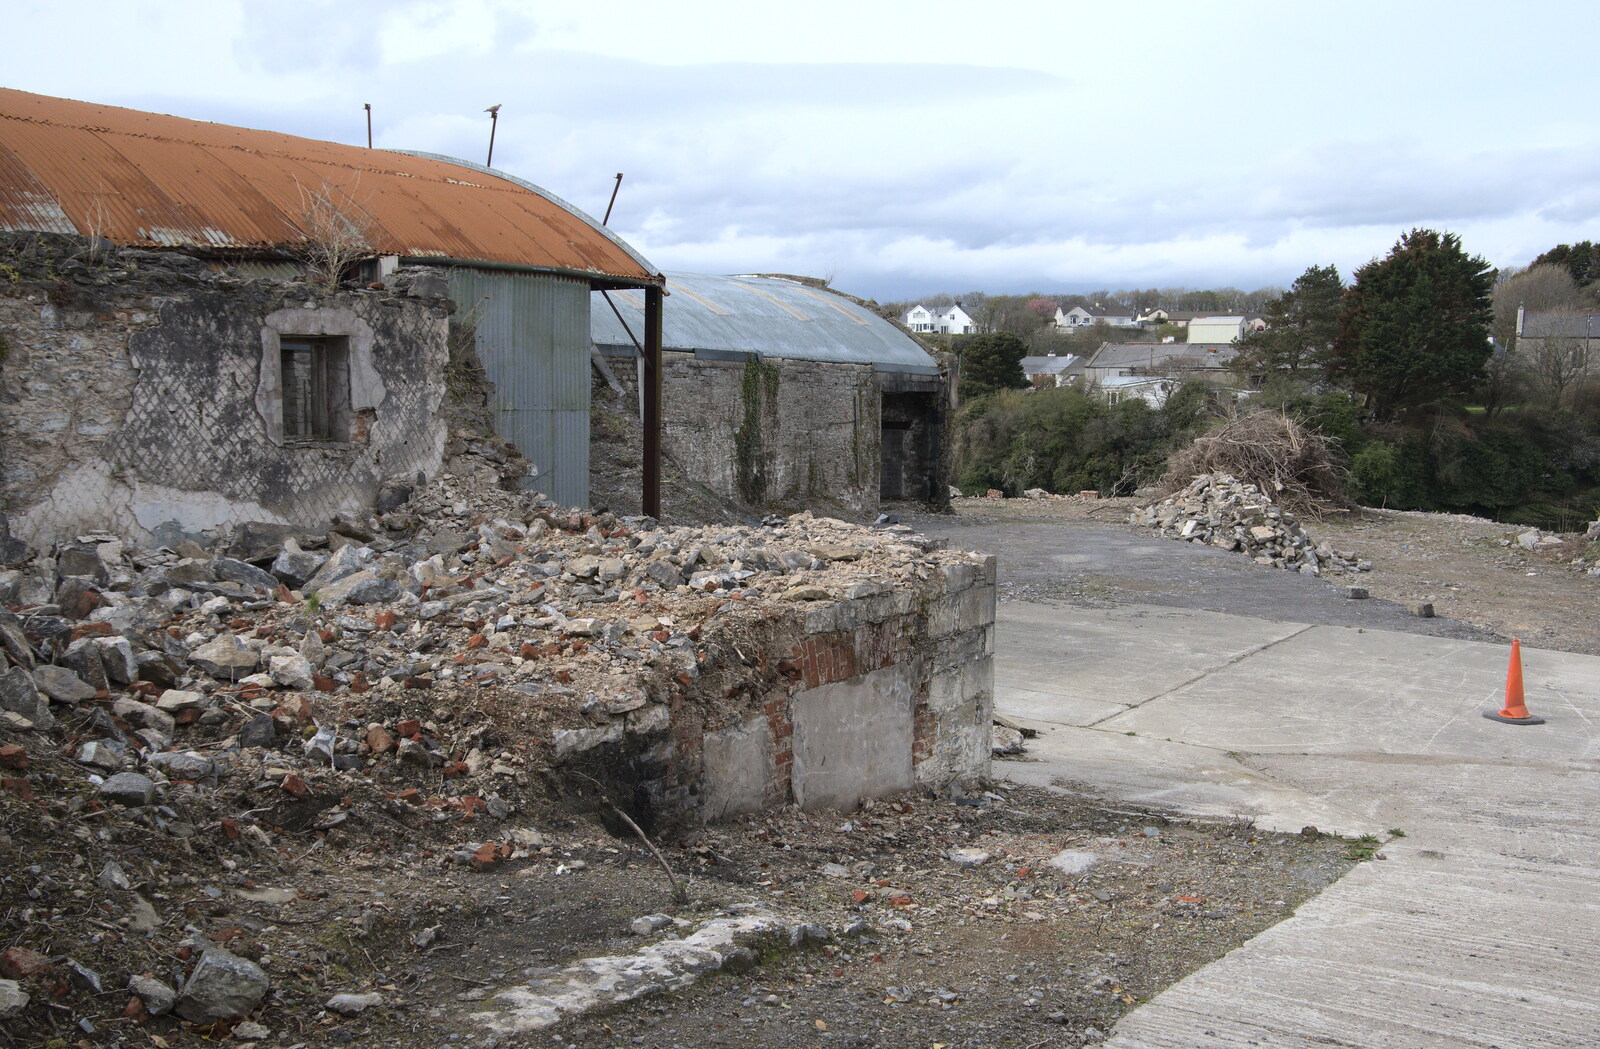 Demolition and dereliction from Manorhamilton and Bundoran, Leitrim and Donegal, Ireland - 16th April 2022